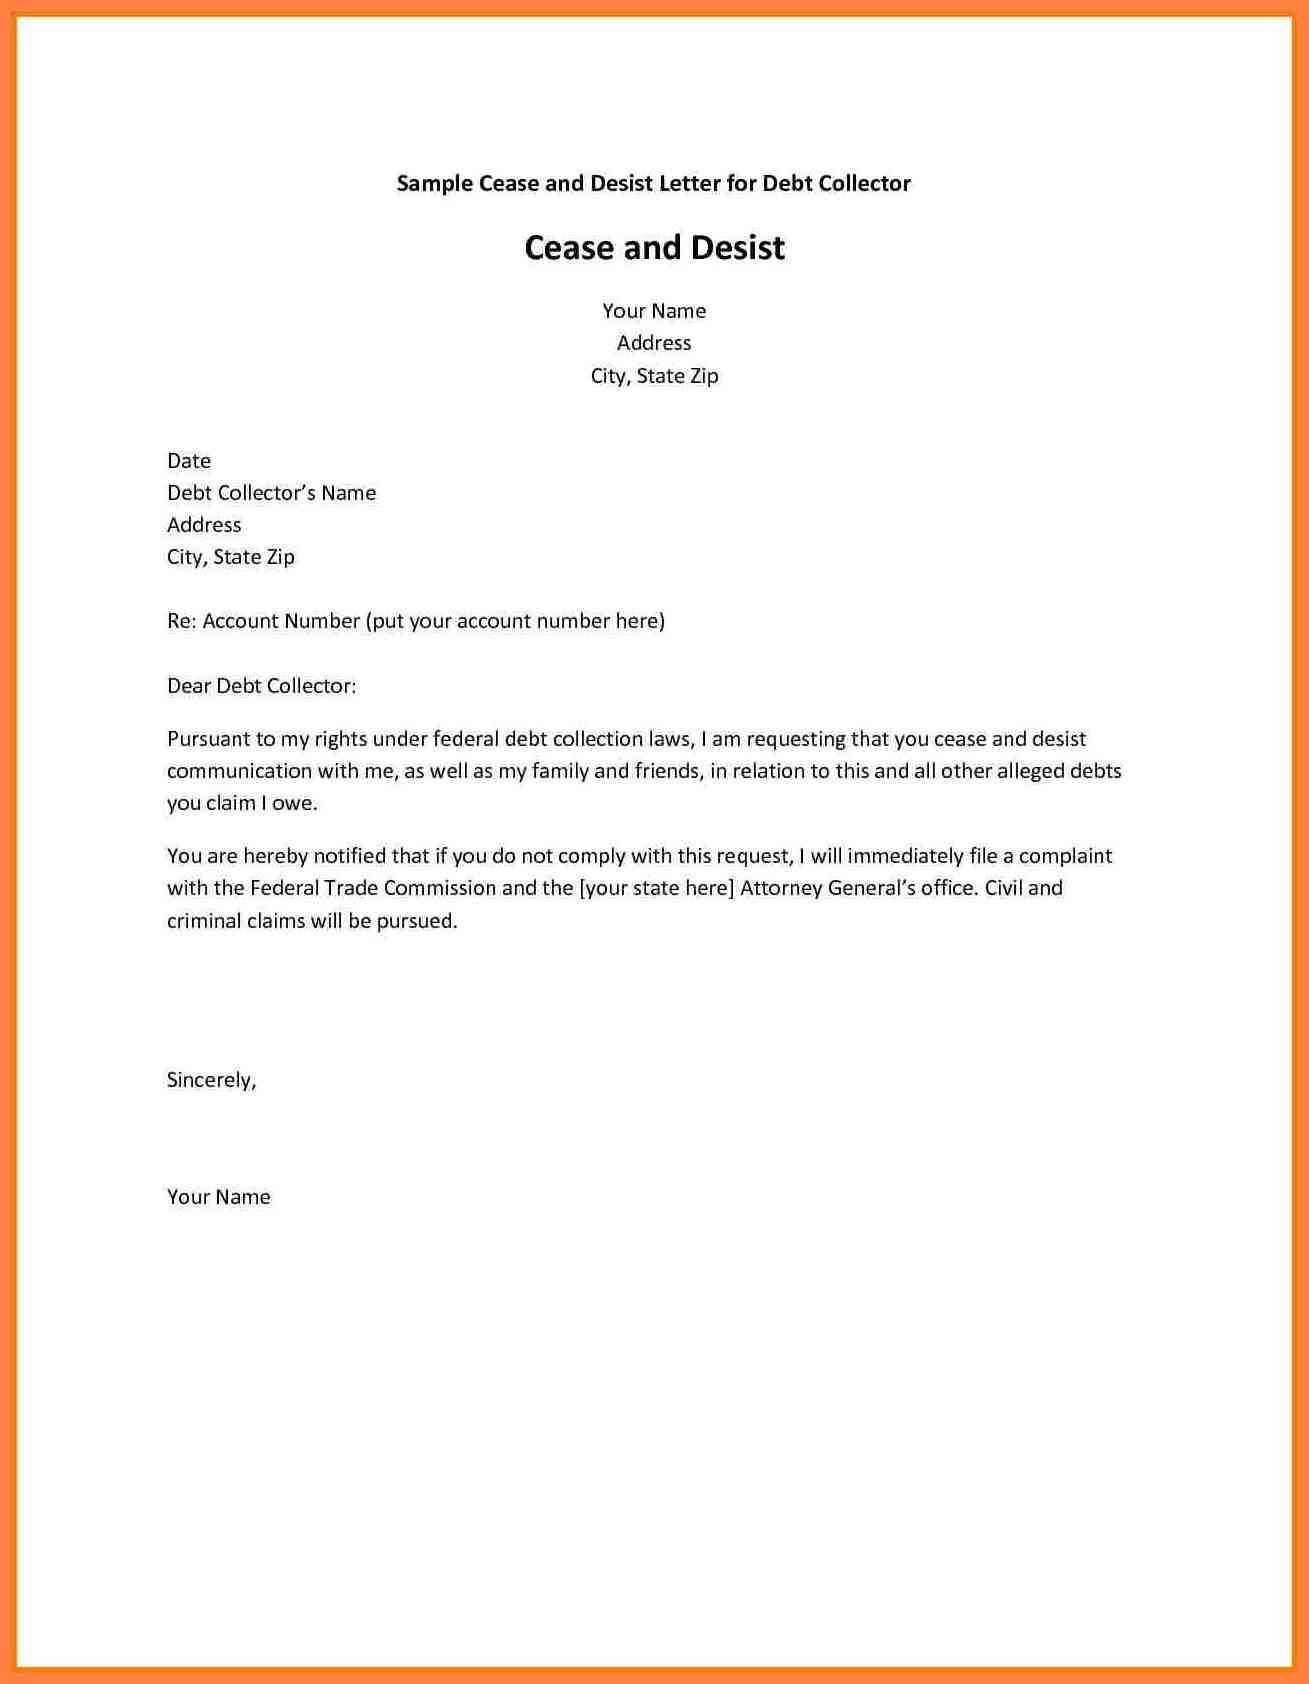 Cease and Desist Letter Template for Debt Collectors - Cease and Desist Letter Sample Lovely Best Debt Collection Cease and